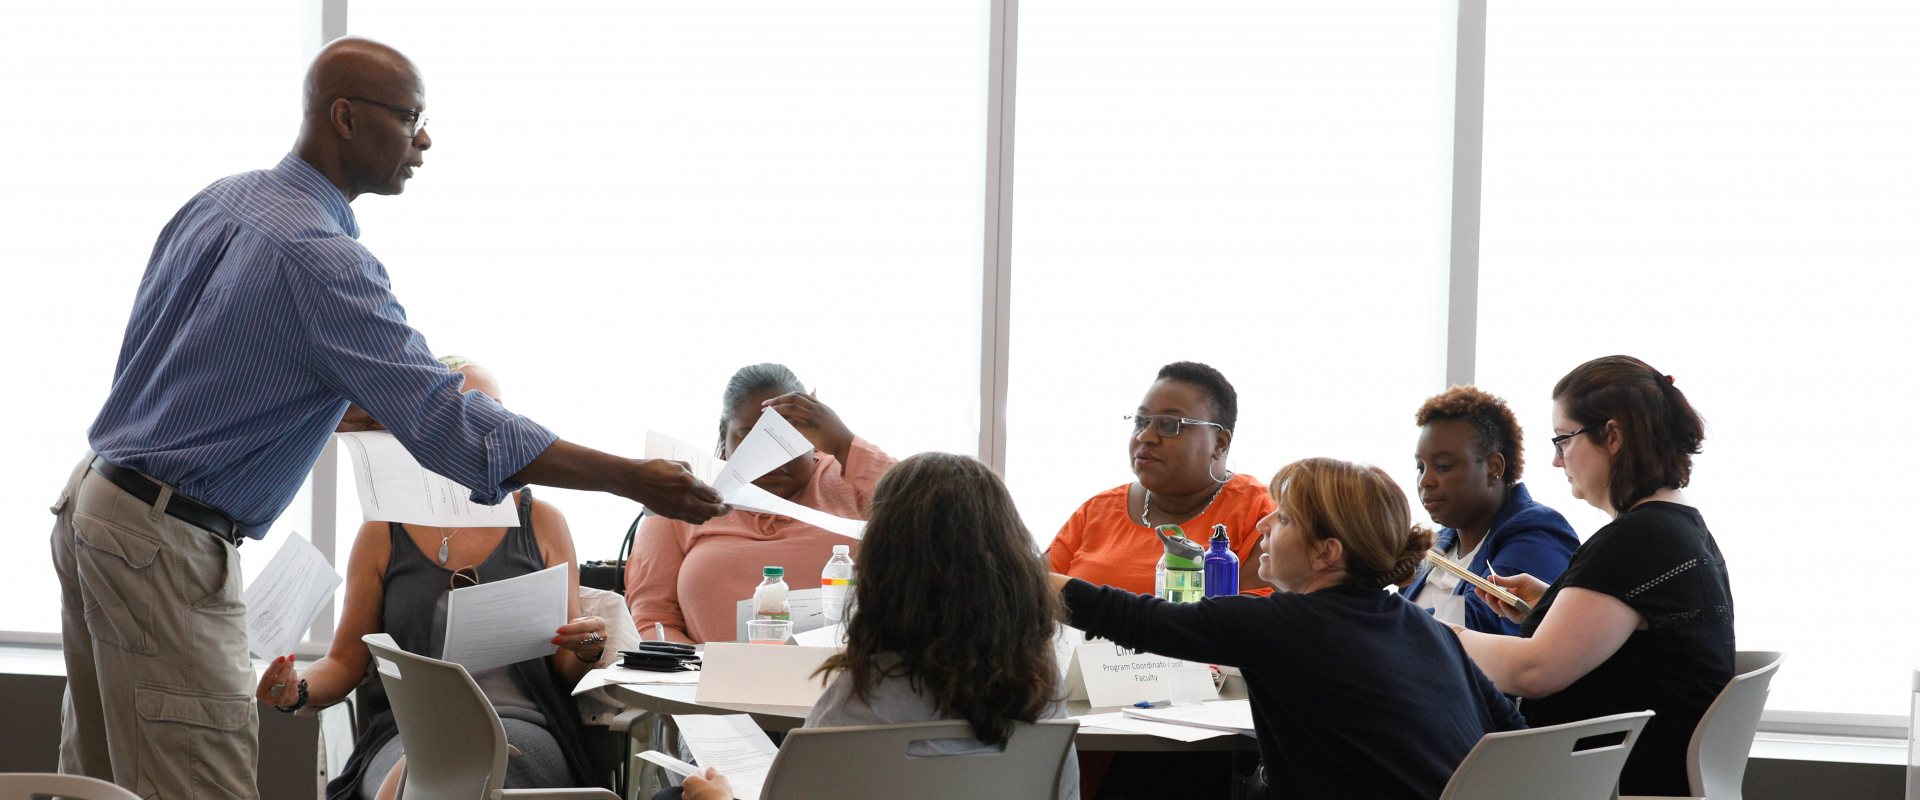 A black man hands out documents to a table of adult students